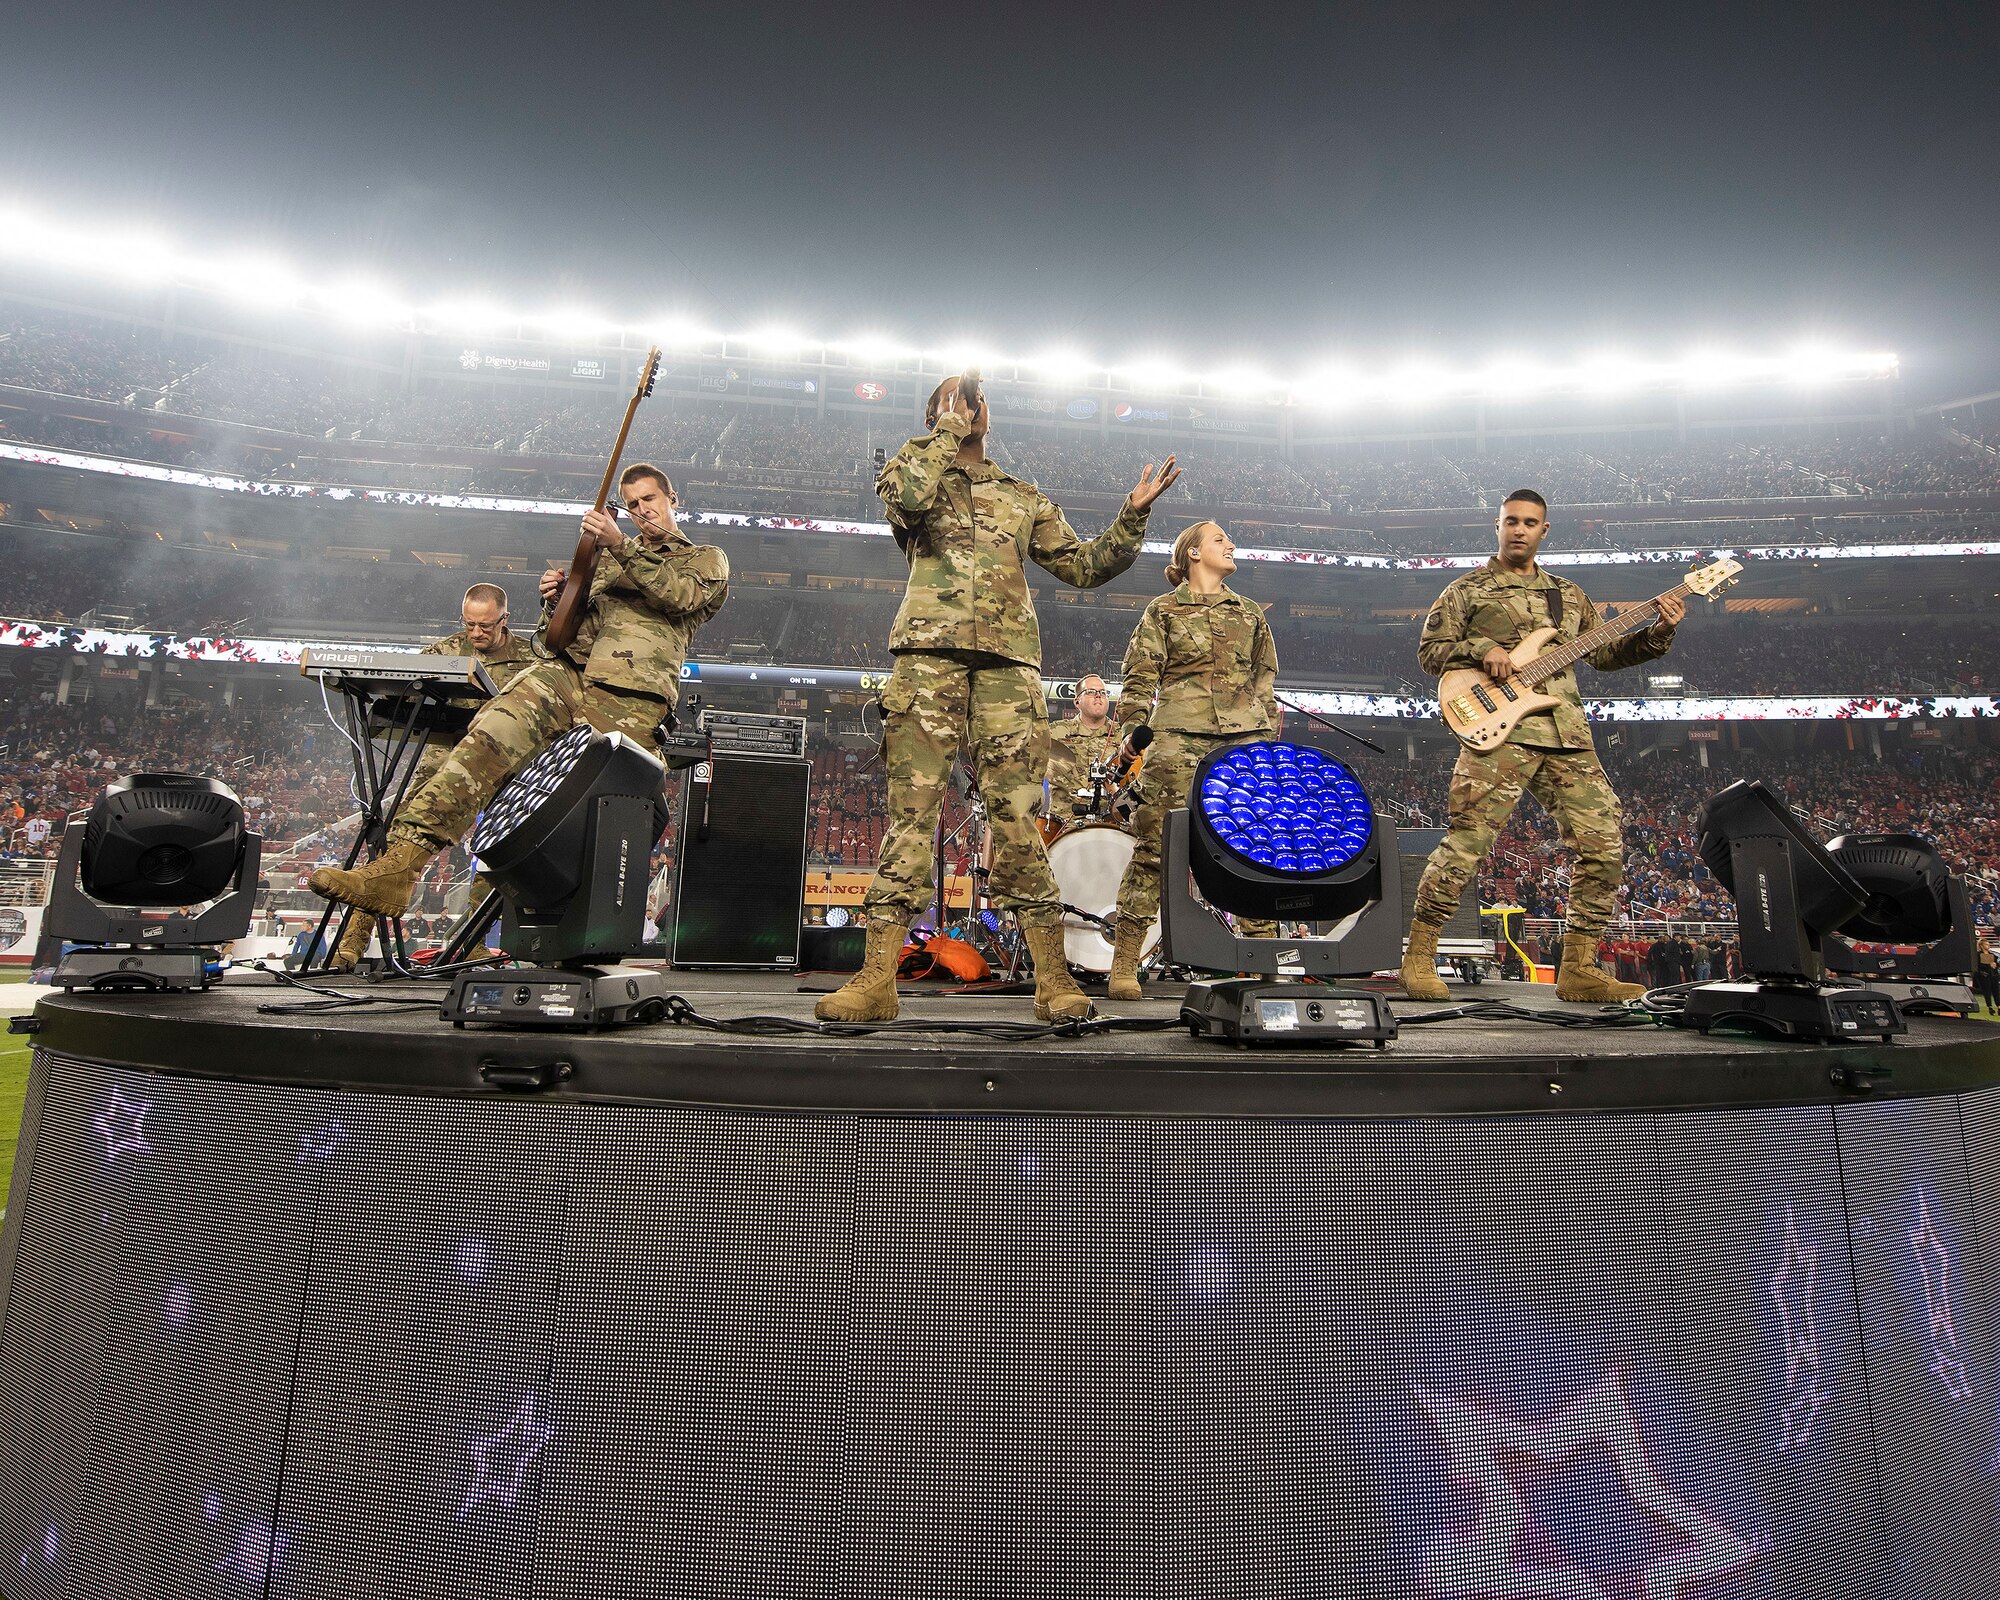 The U.S. Air Force Band of the Golden West from Travis Air Force Base, California, perform during halftime of the San Francisco Forty-Niners and New York Giants Monday Night Football game at Levi’s Stadium in Santa Clara, California, Nov. 12, 2018. The band performed in honor of Veterans Day and to support the National Football League’s Salute to Service Campaign. (U.S. Air Force photo by Louis Briscese)